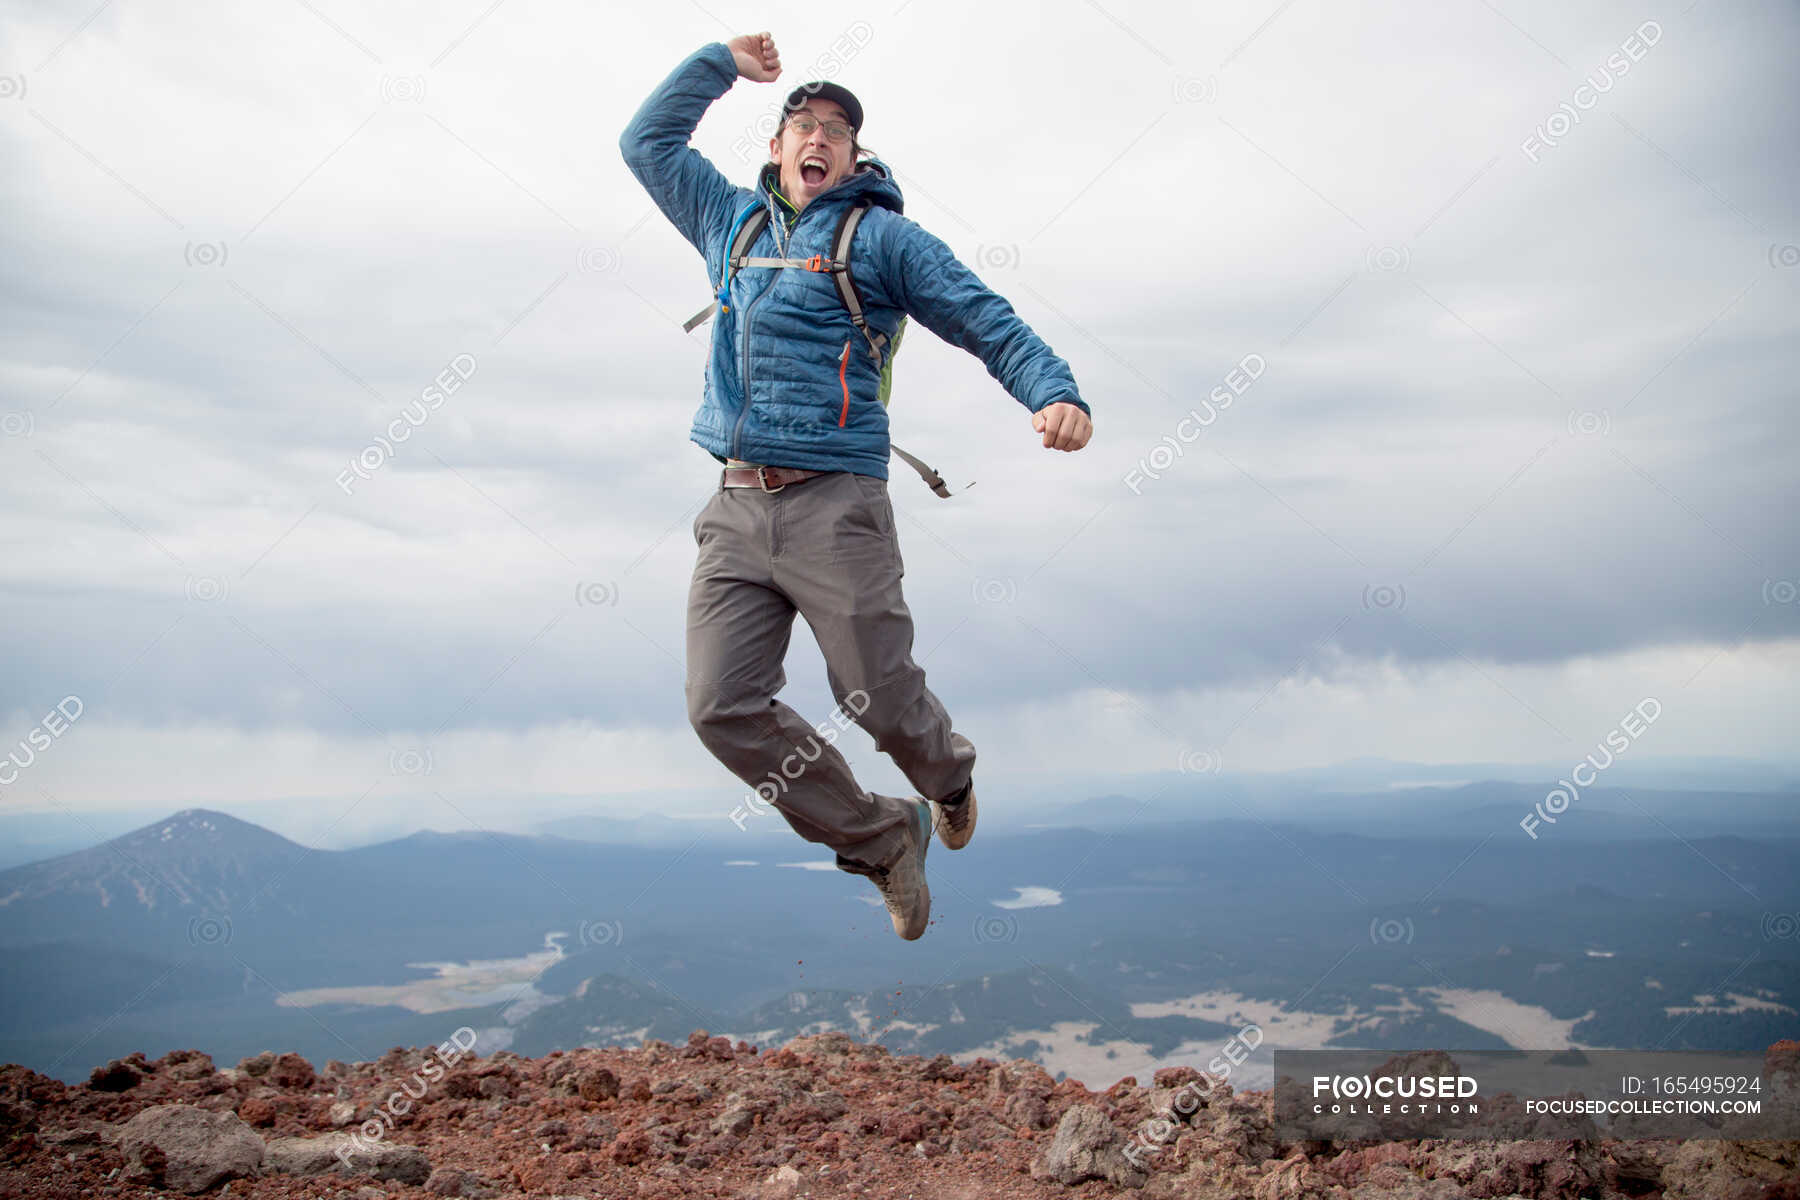 person jumping for joy